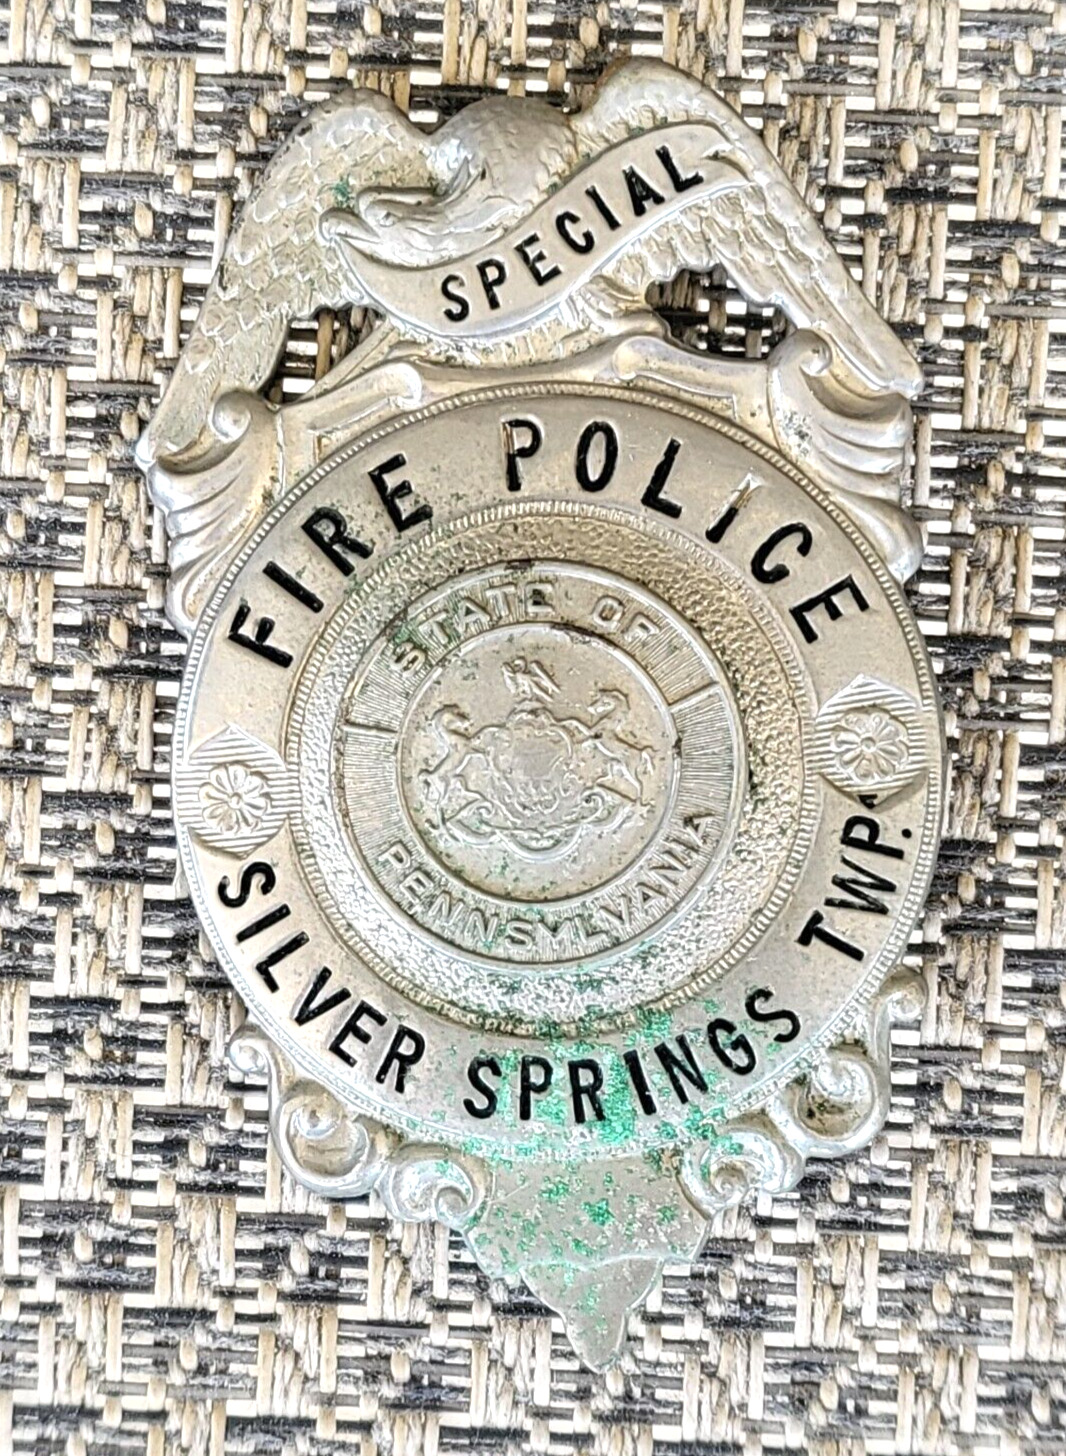 Special FIRE/POLICE MEMBER BADGE Silver Spring, Penna